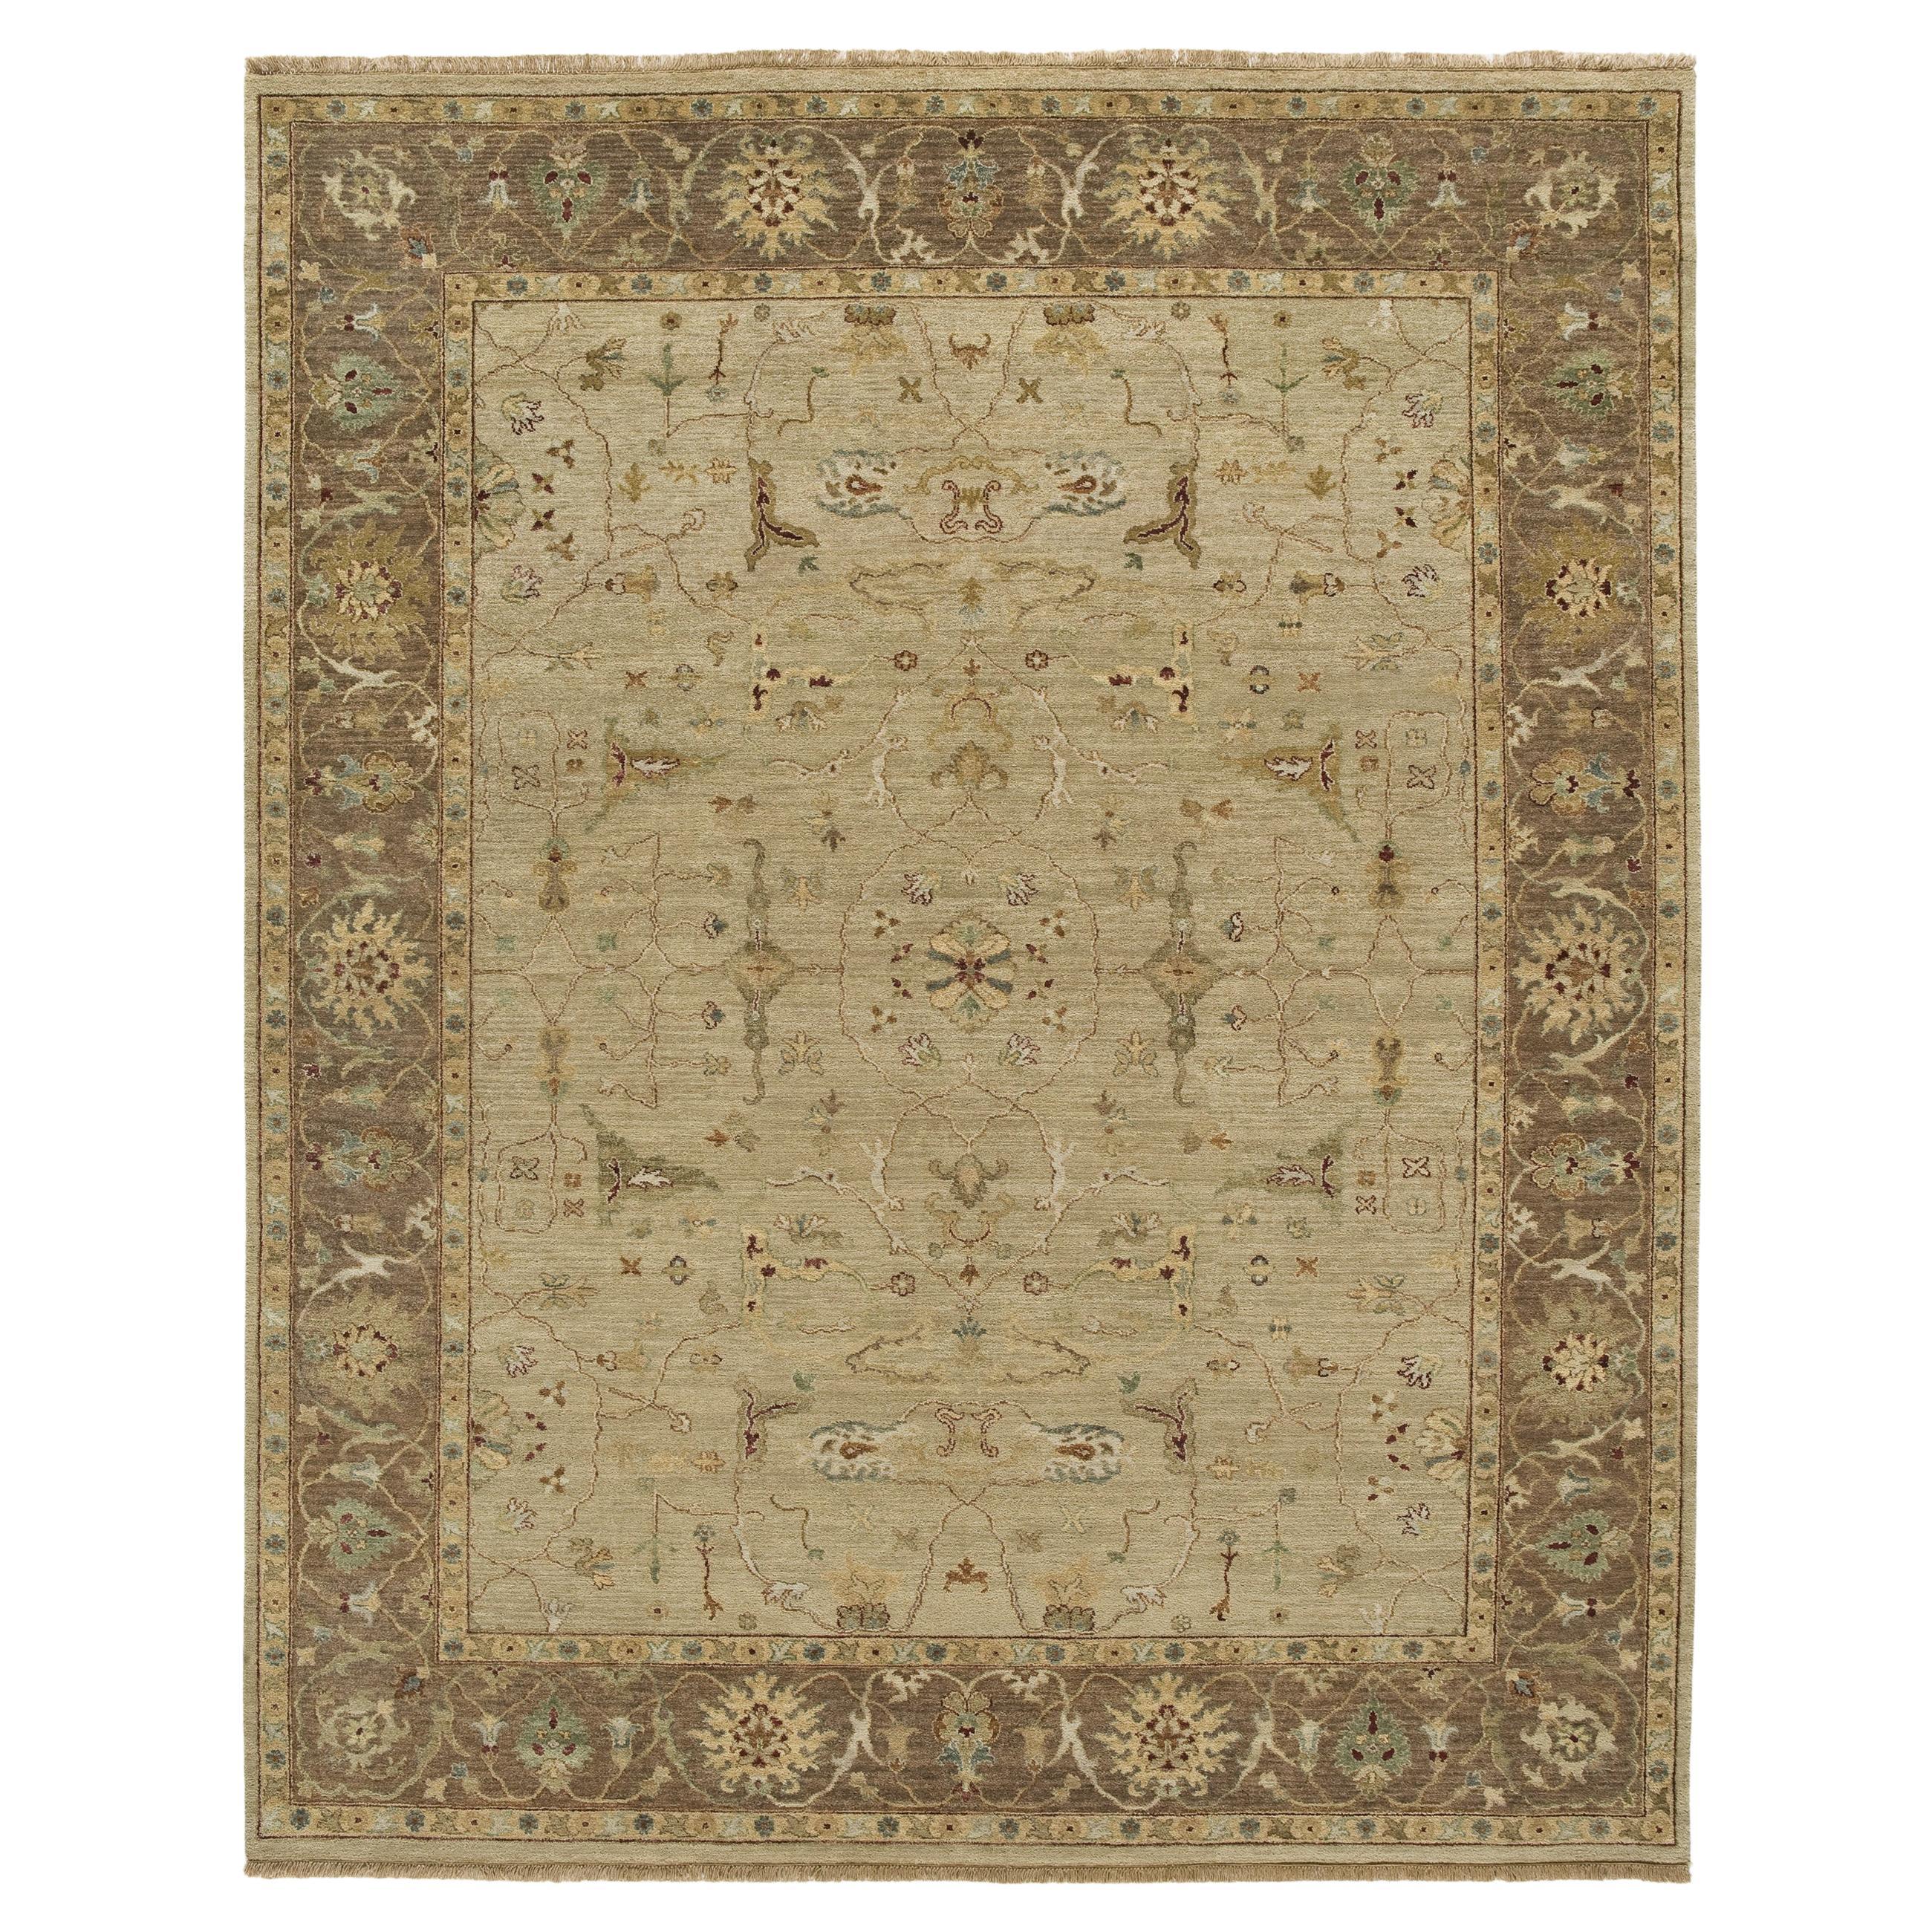 Luxury Traditional Hand-Knotted Beige/Chestnut 12x24 Rug